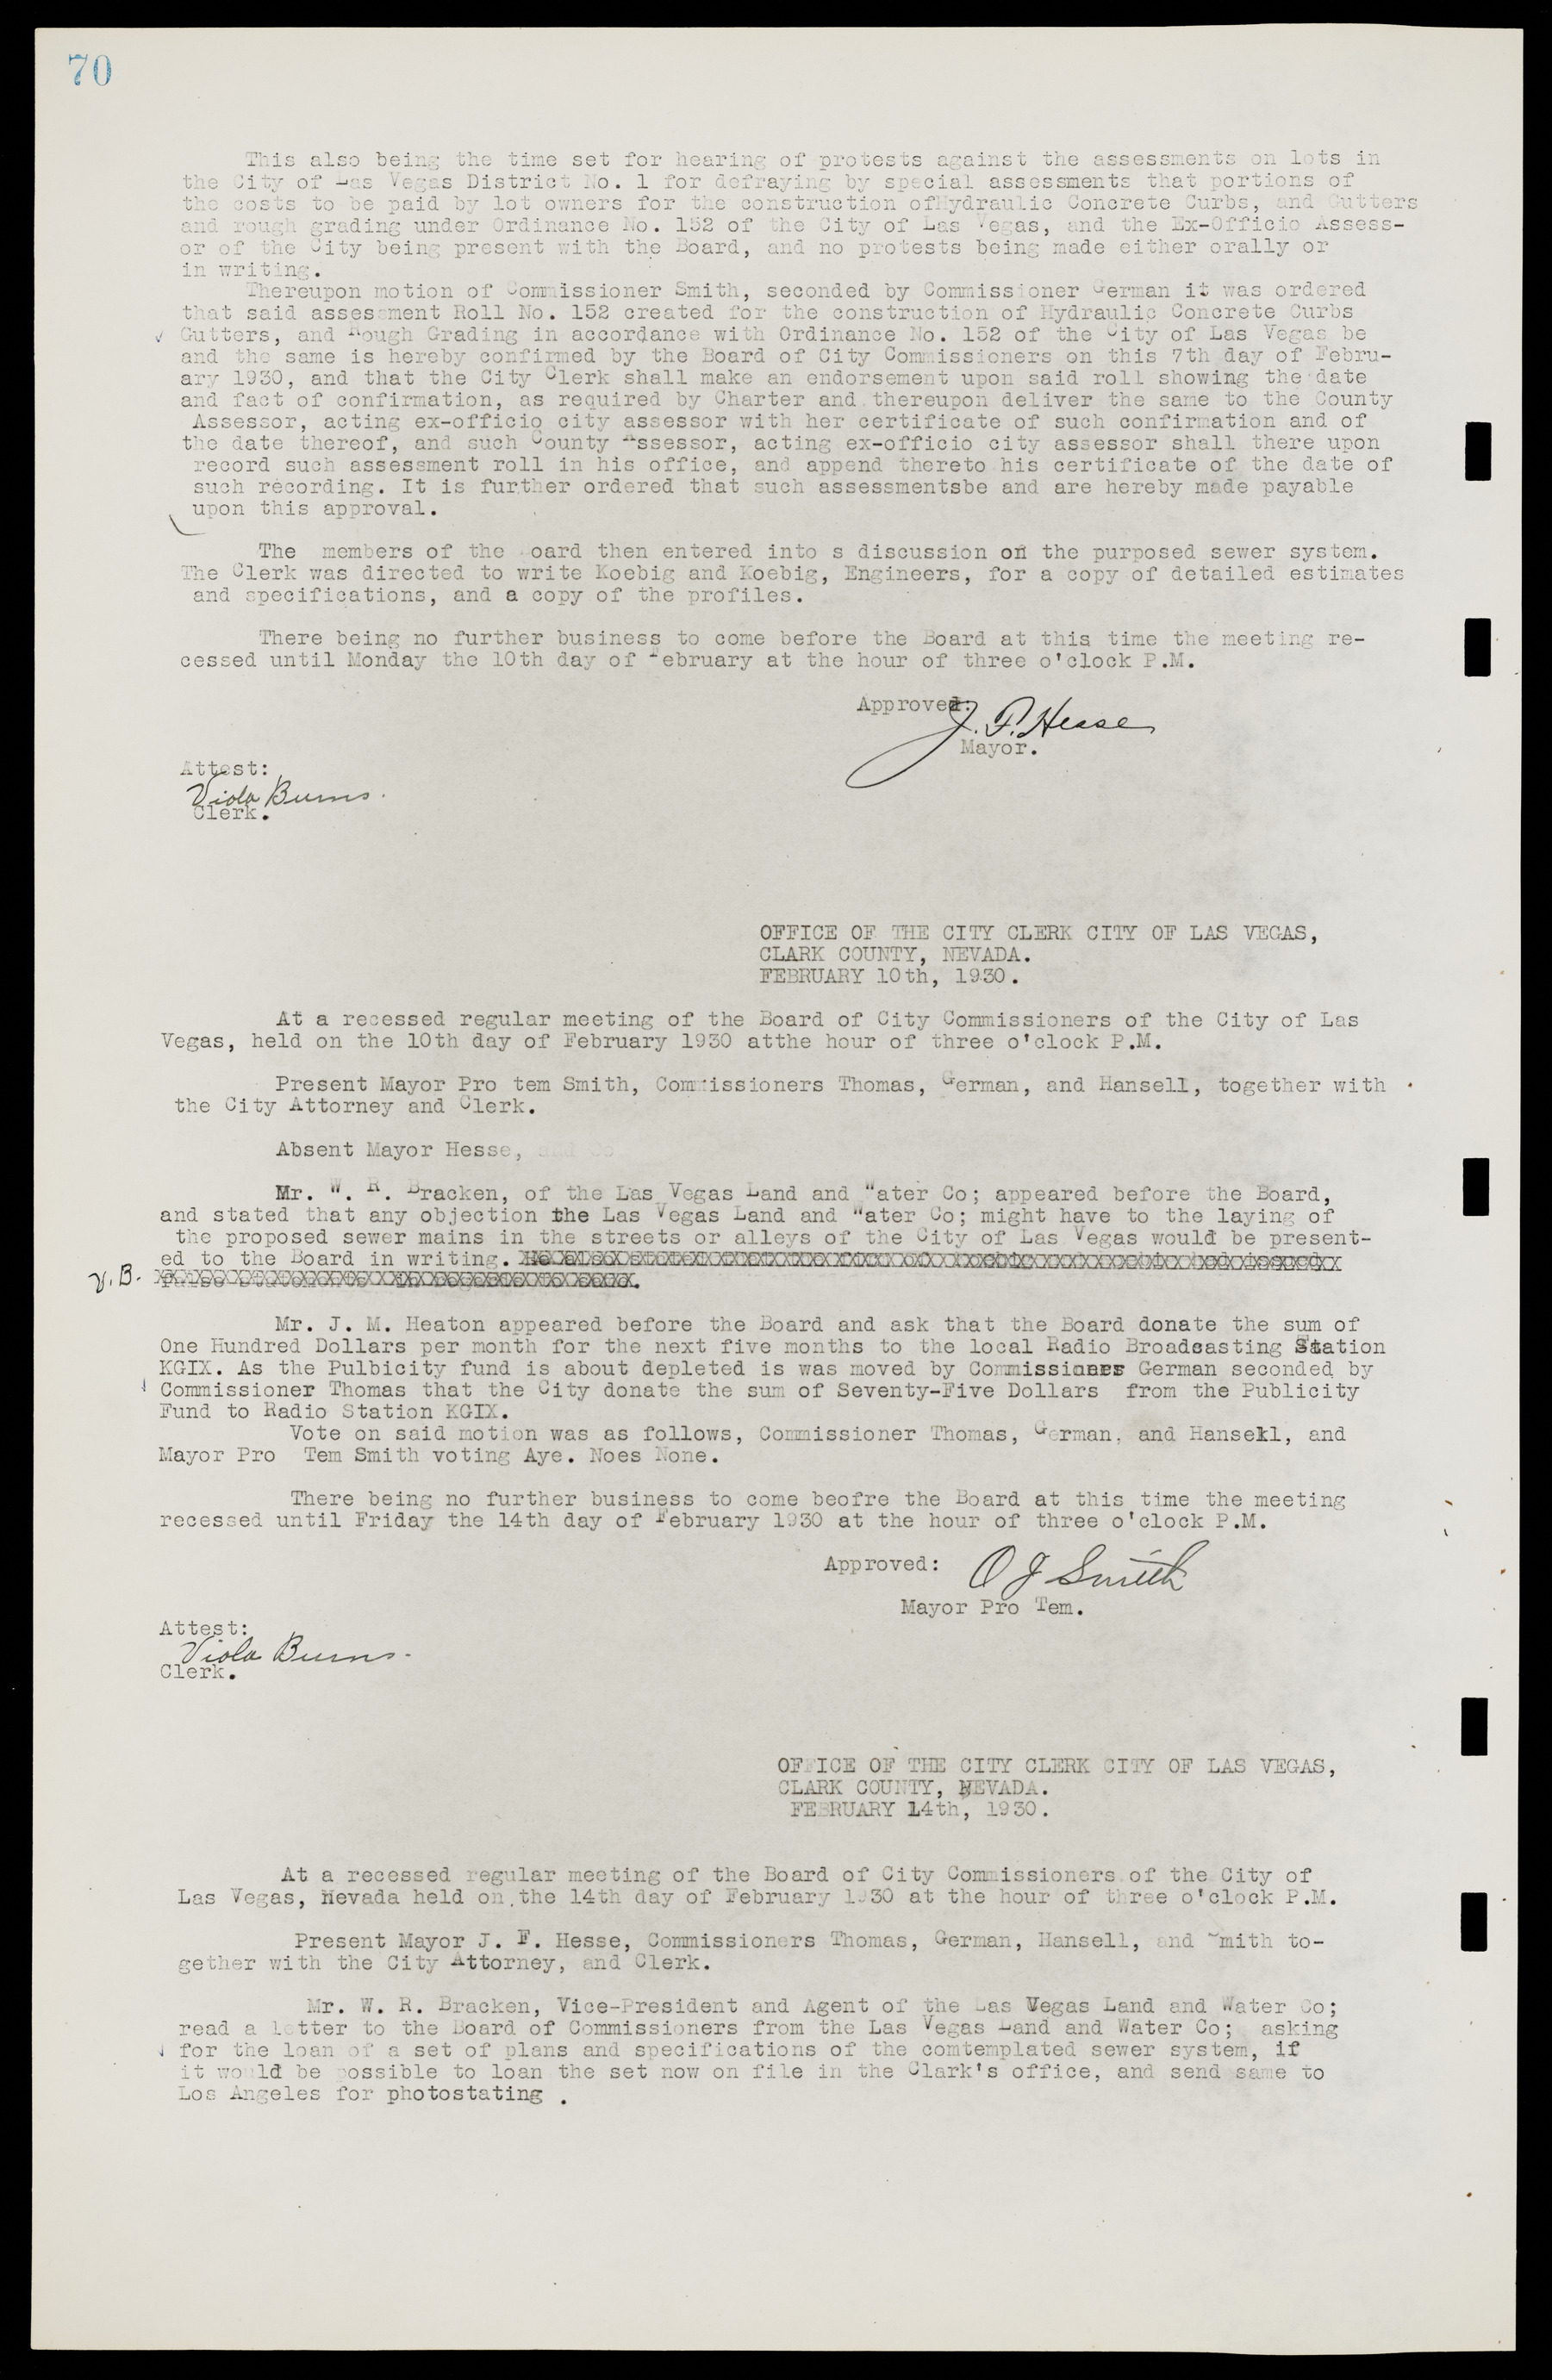 Las Vegas City Commission Minutes, May 14, 1929 to February 11, 1937, lvc000003-76